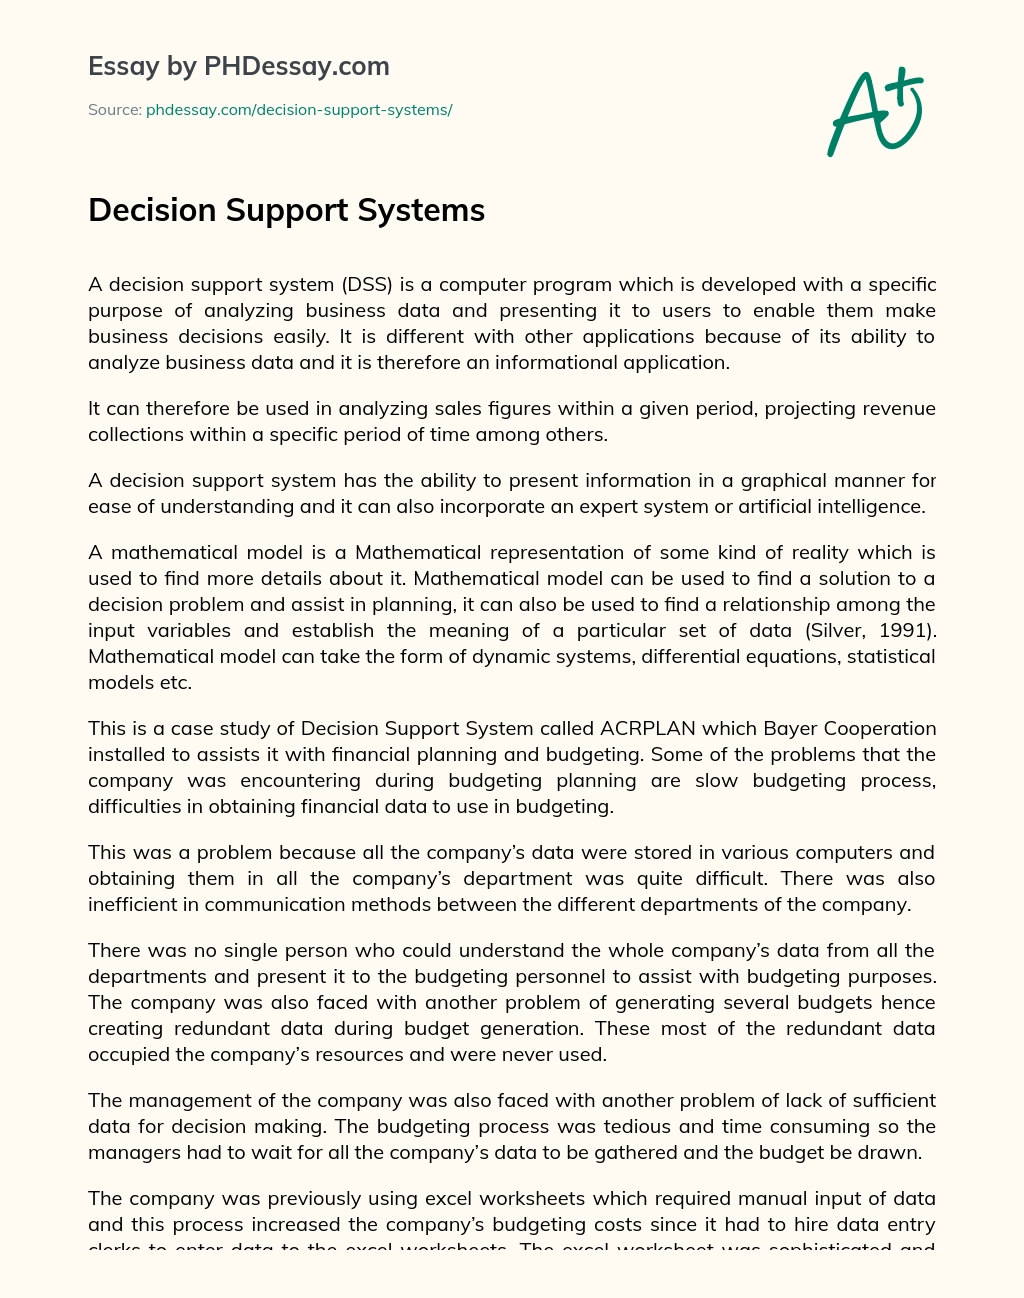 Decision Support Systems essay